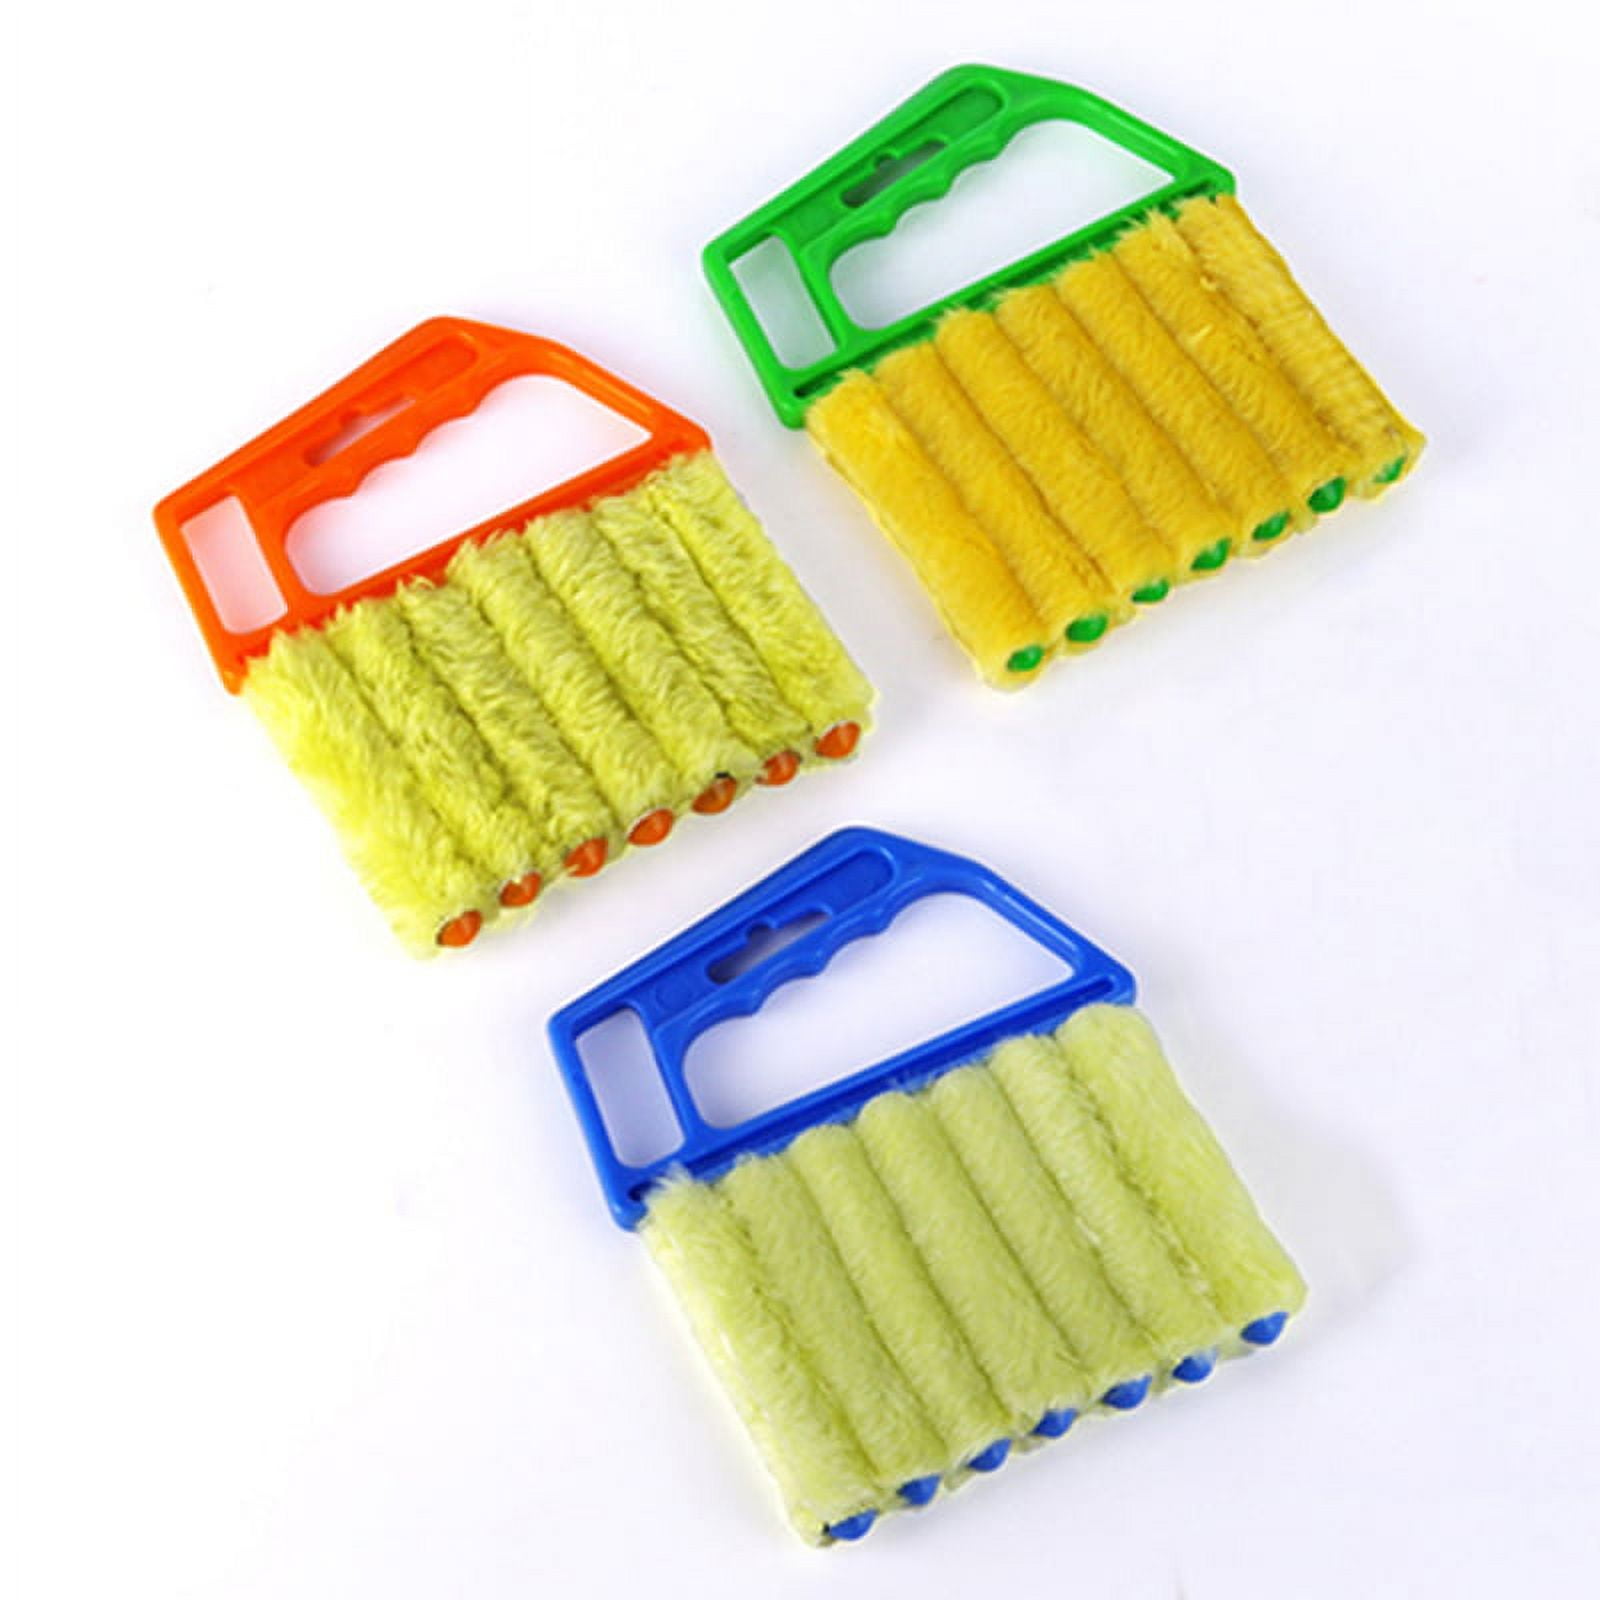 Openfly Venetian Blind Cleaner Duster Tool, Hand-held Window Shutters  Duster, Window Blind Cleaning Tool, Groove Gap Cleaning Brush for Blind,  Air